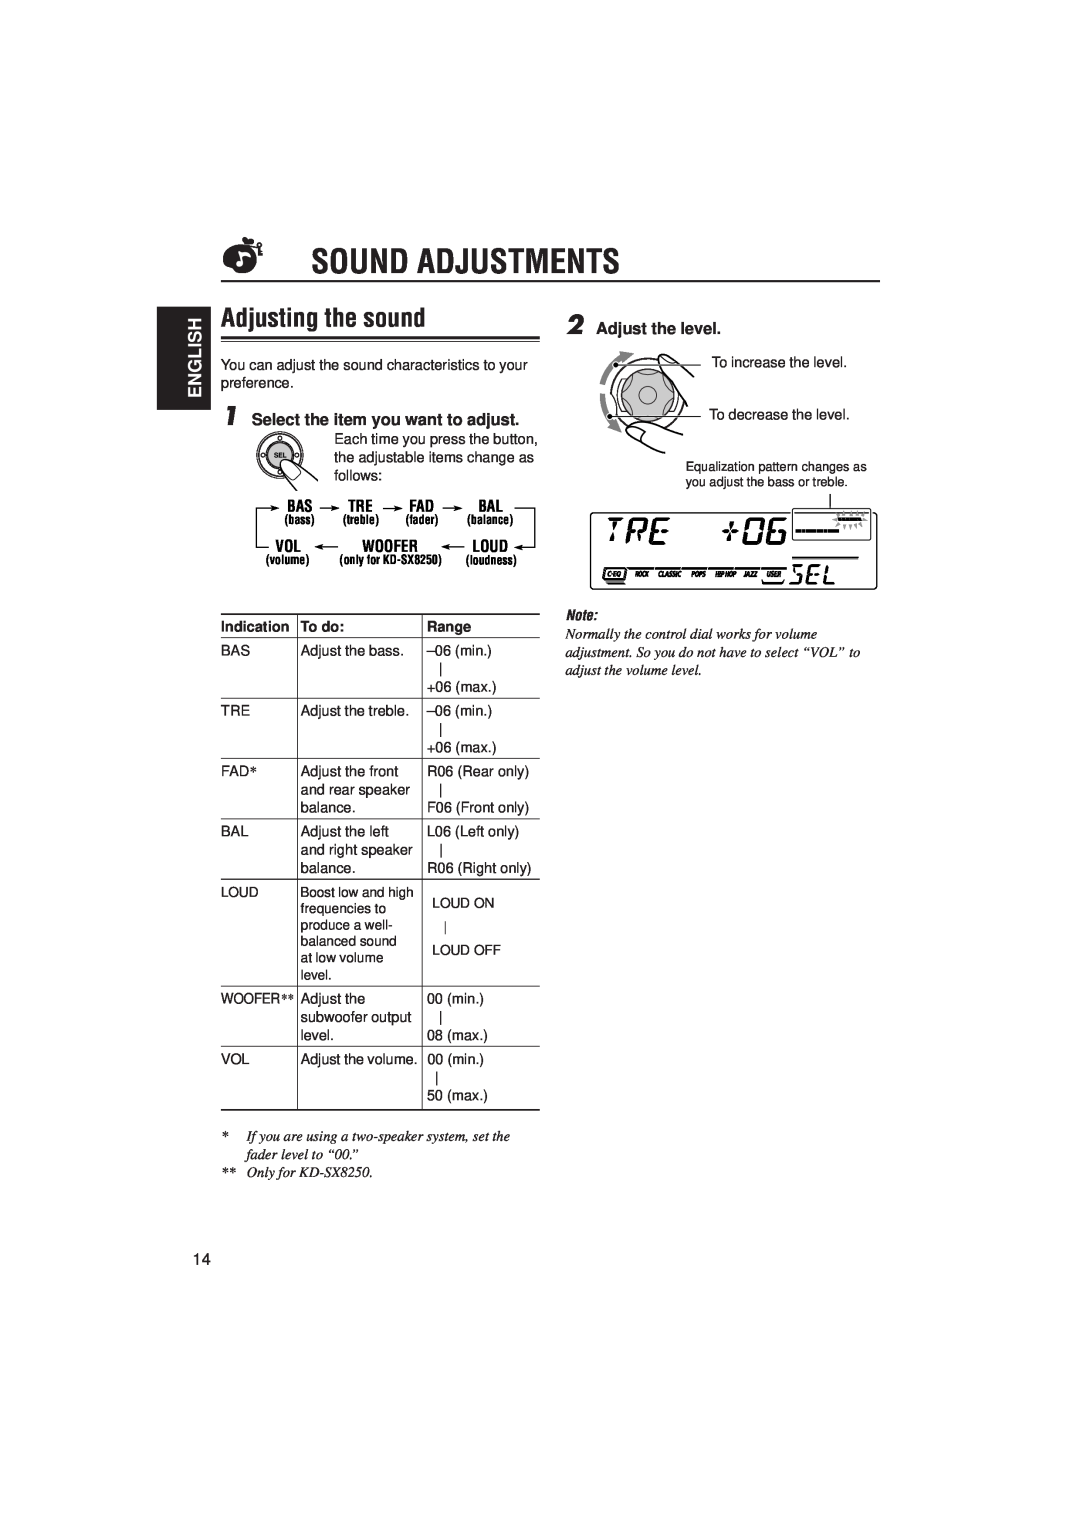 JVC KD-SX8250 Sound Adjustments, Adjusting the sound, Adjust the level, Select the item you want to adjust, English, To do 